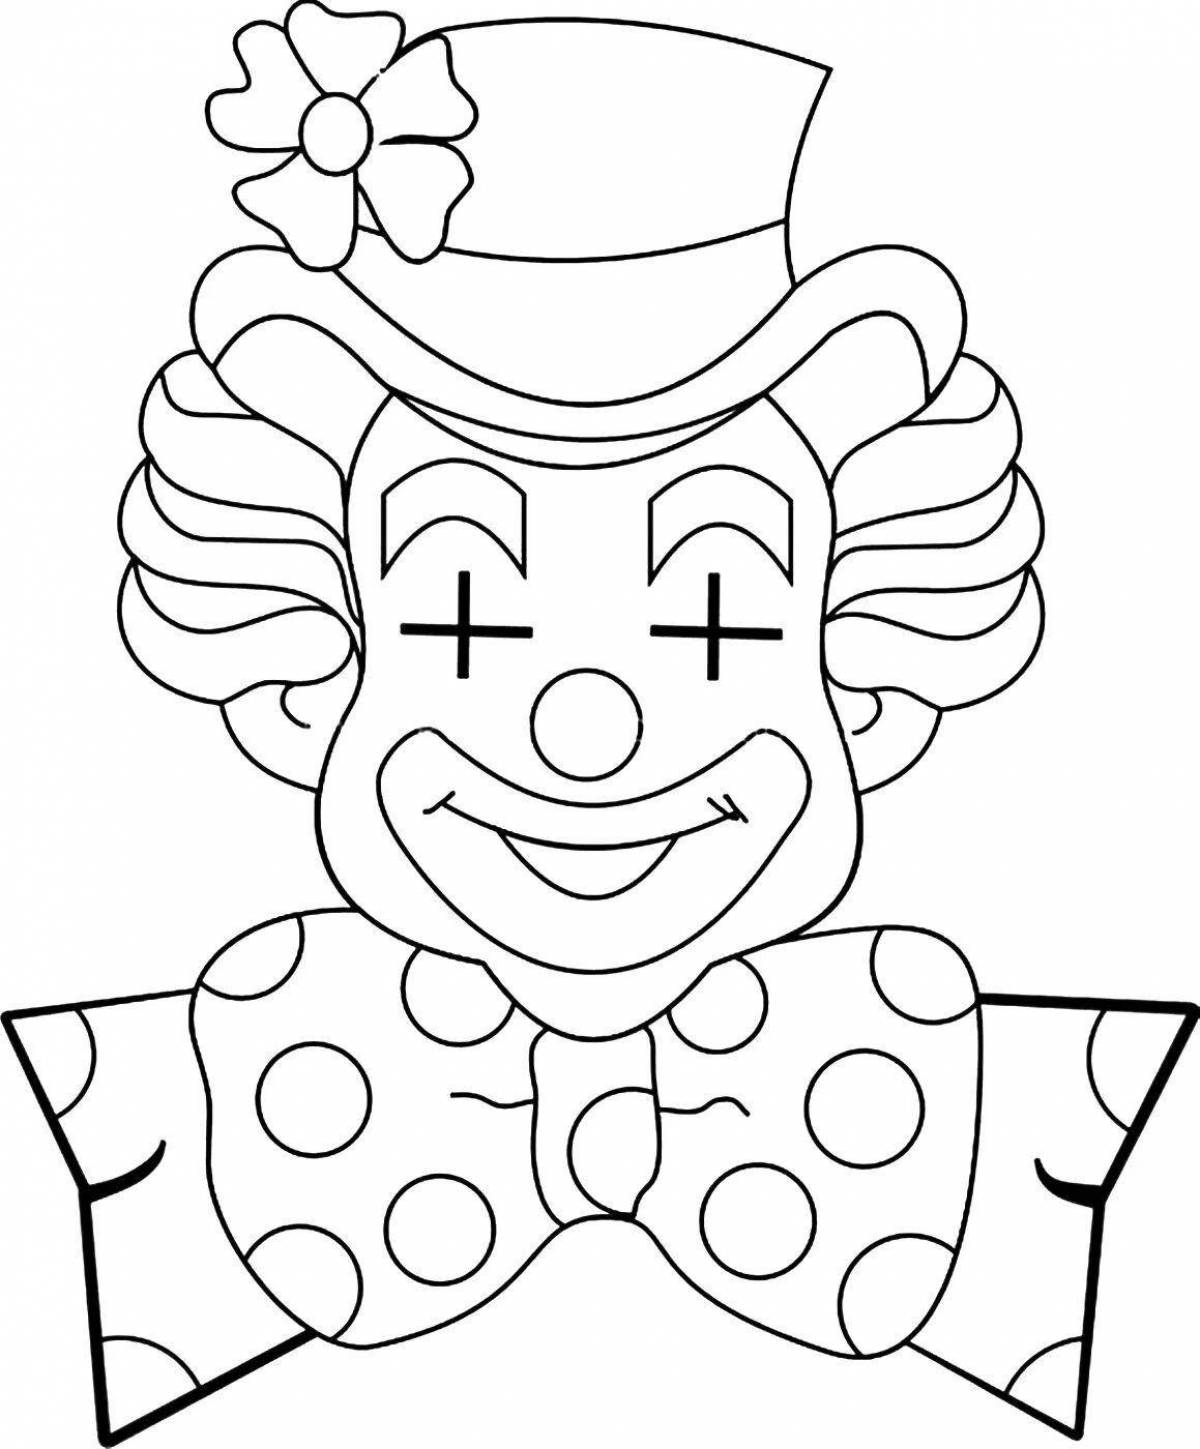 Coloring clown head with rich colors